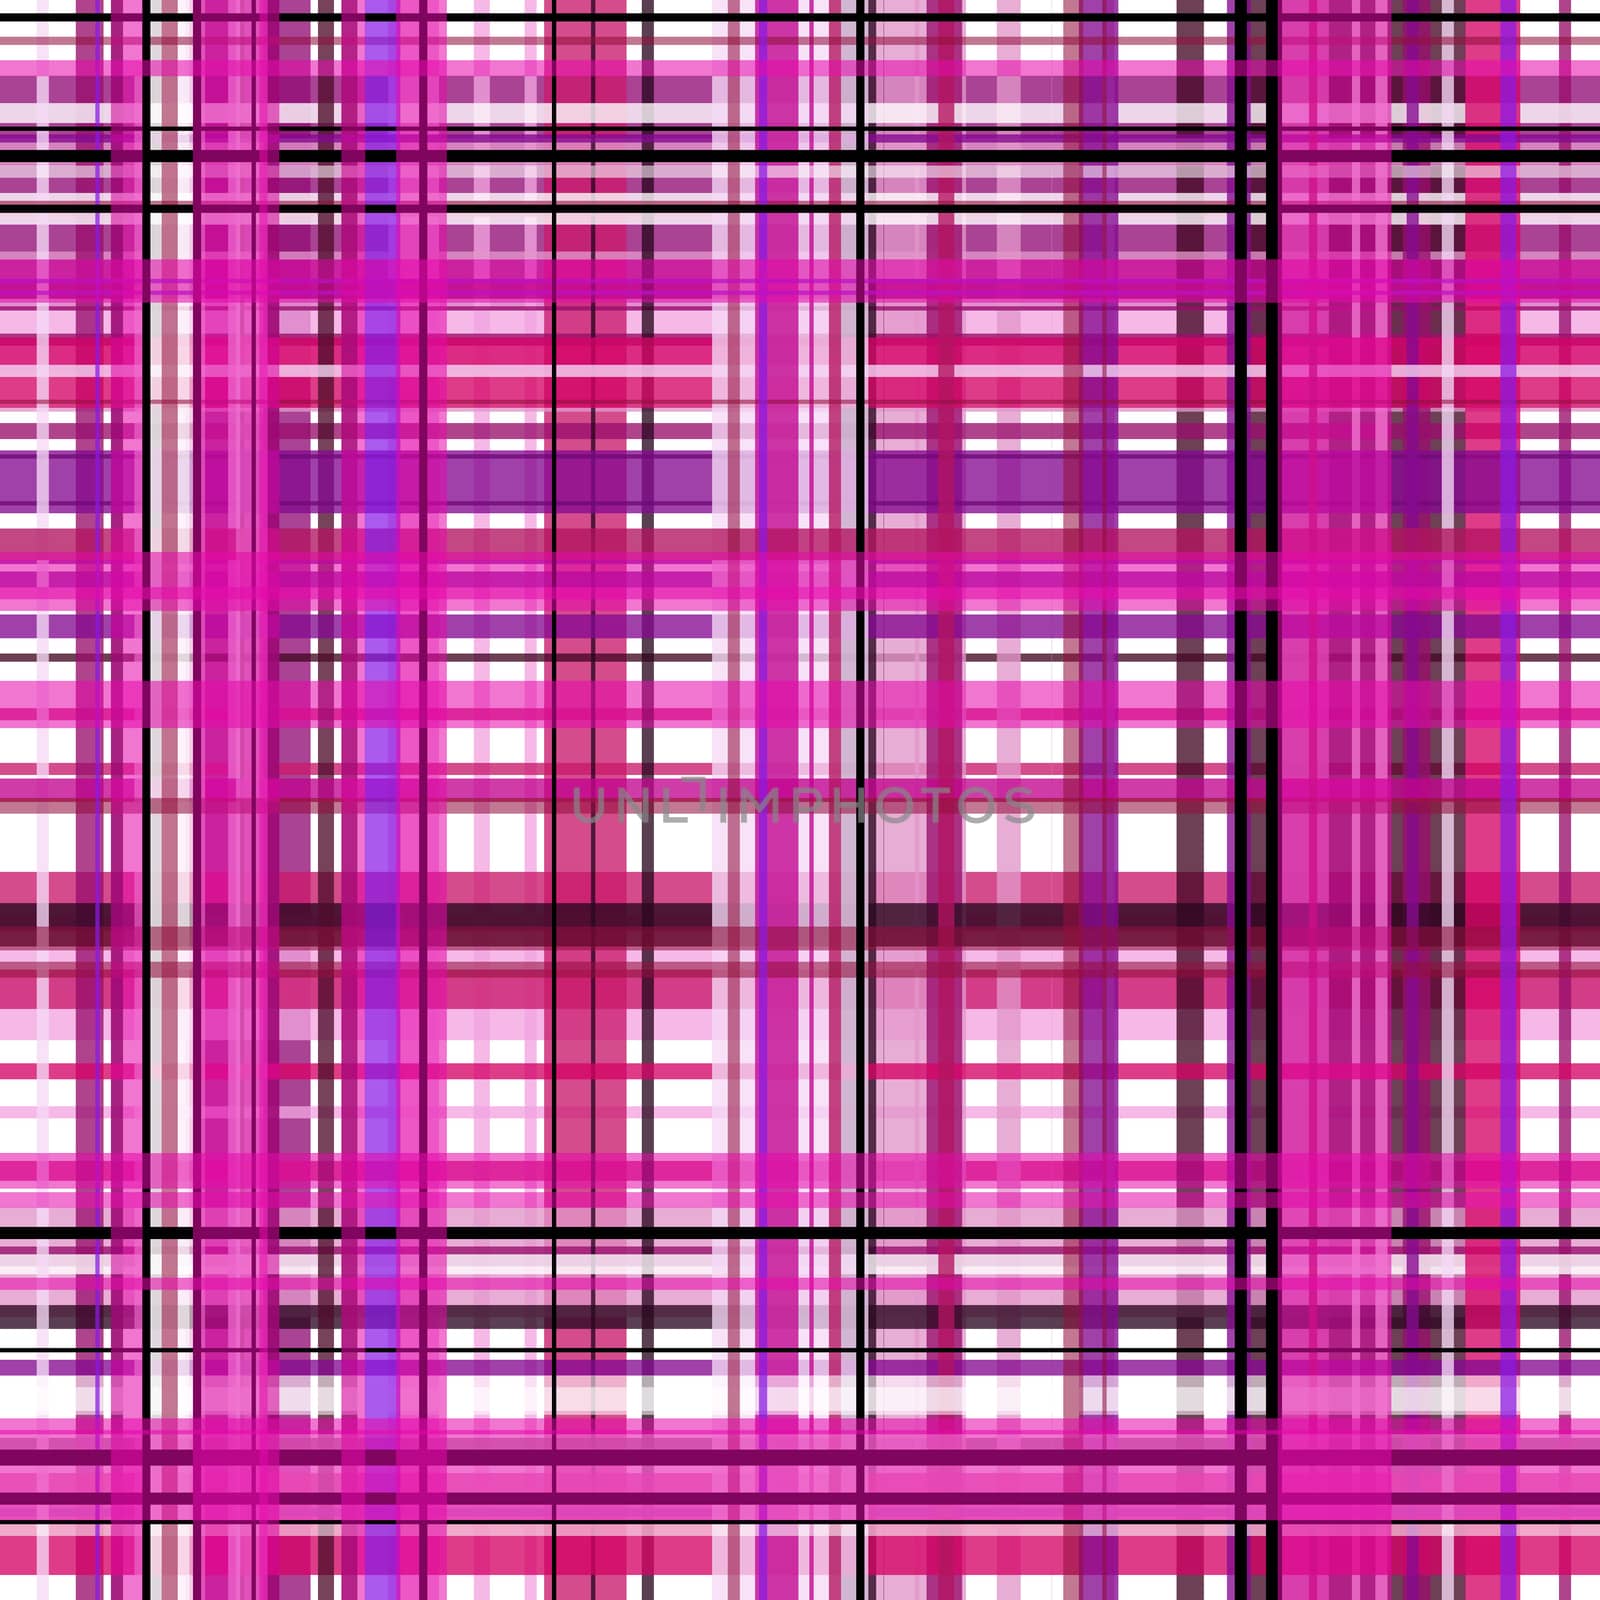 Plaid purple and white seamless tileable digital graphic